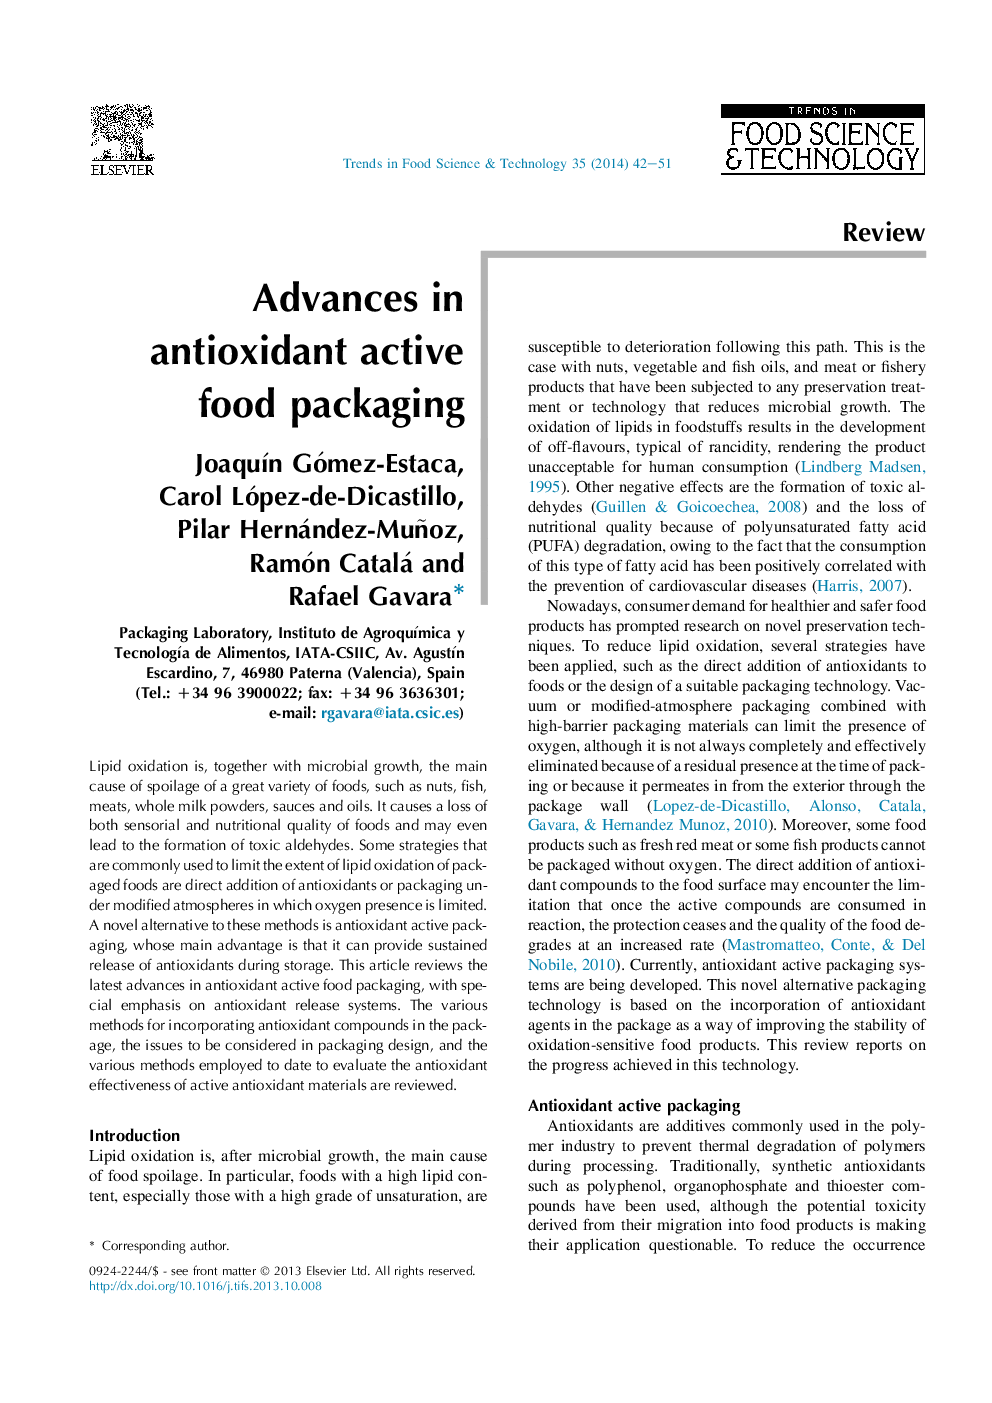 Advances in antioxidant active food packaging